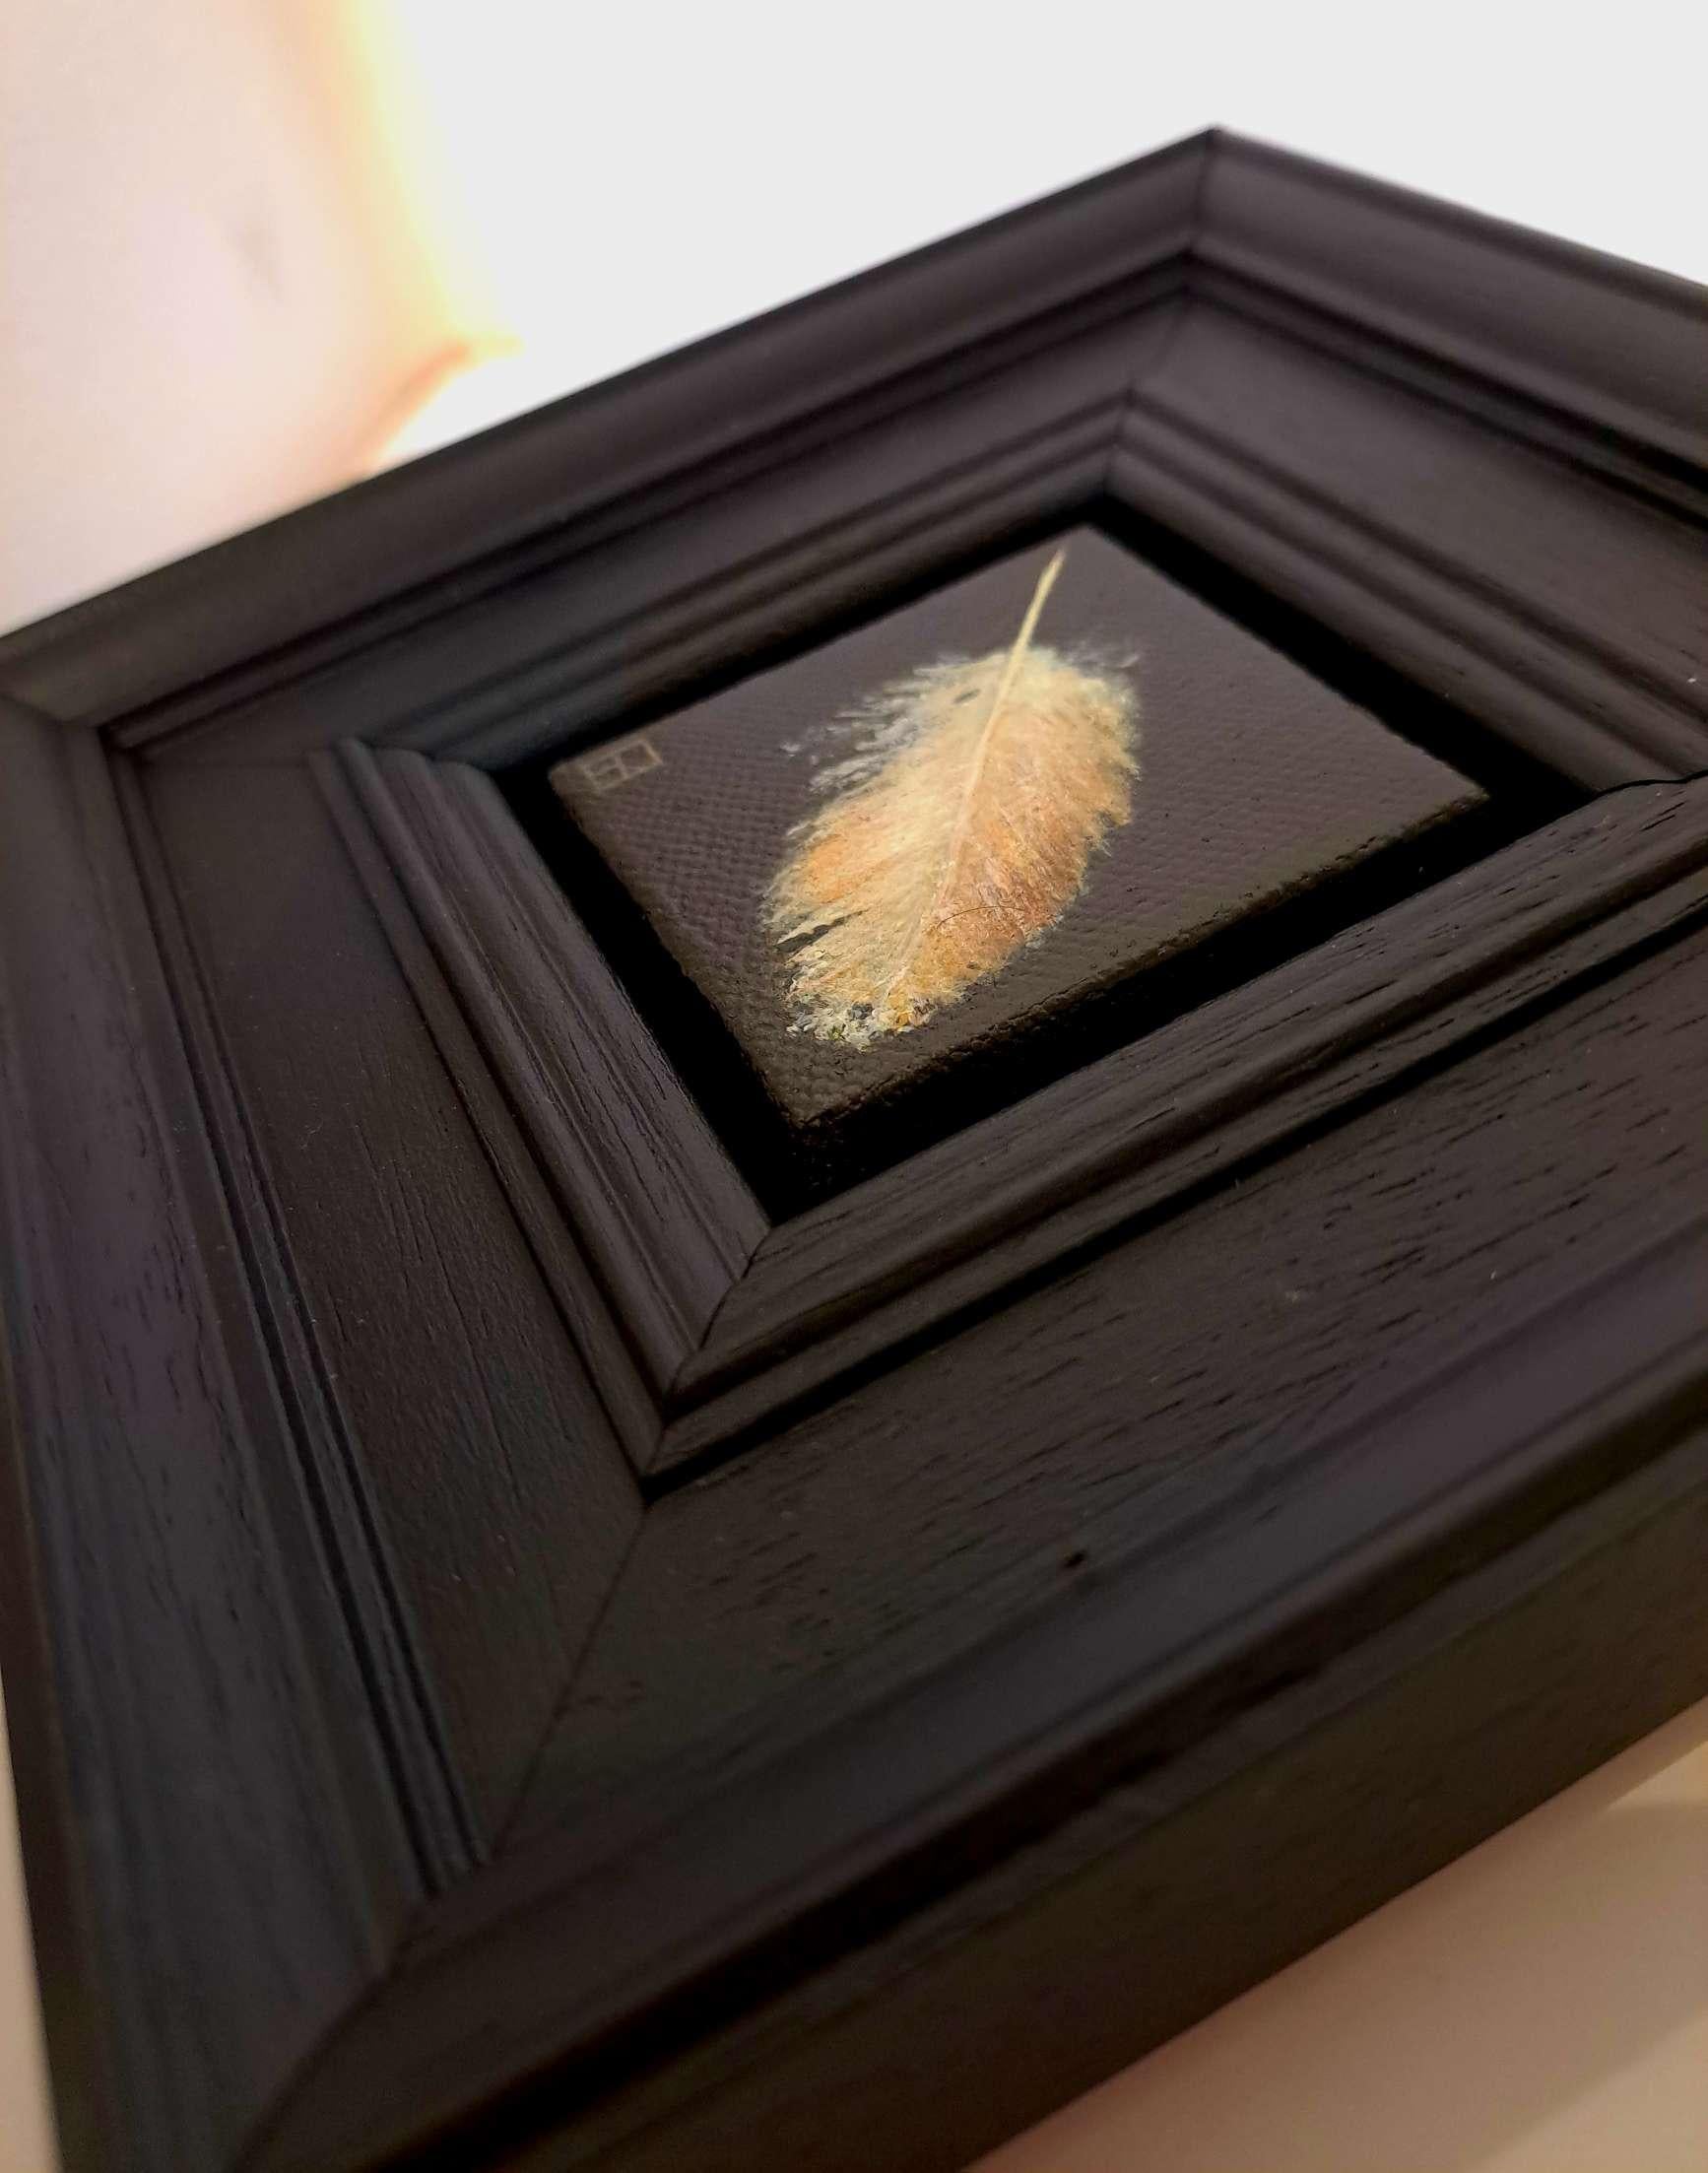 Spring Collection: Tawny Owl Feather is an original oil painting by Dani Humberstone as part of her Pocket Painting series featuring small scale realistic oil paintings, with a nod to baroque still life painting. The paintings are set in a black